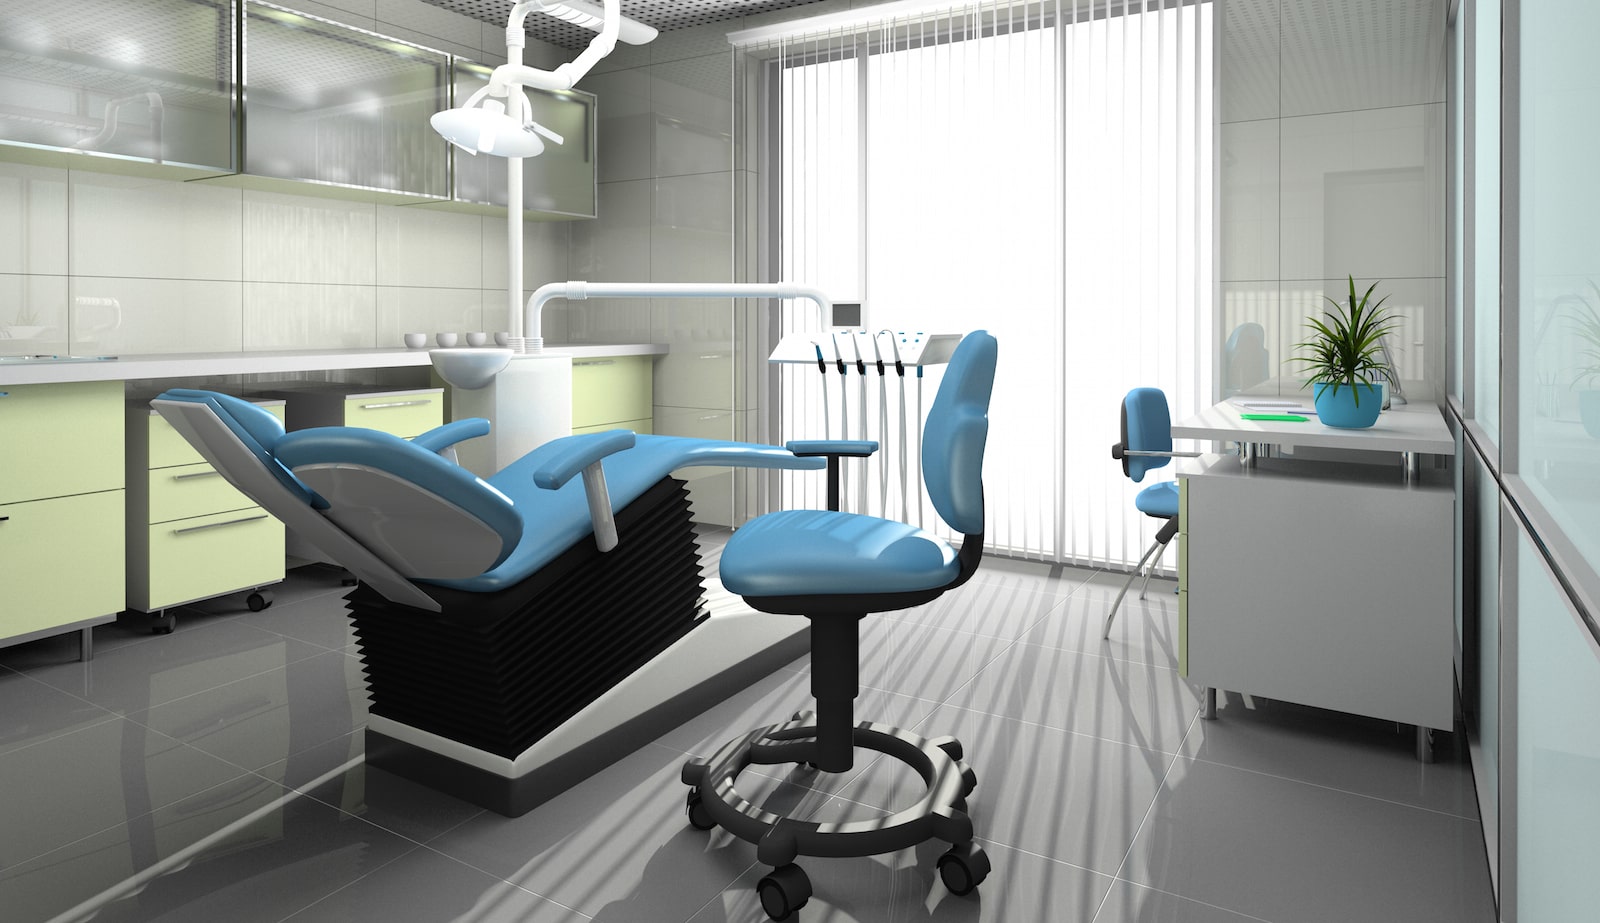 Plastic Surgery Clinics in 2020 - Steps to Opening One | Cosmetic Town